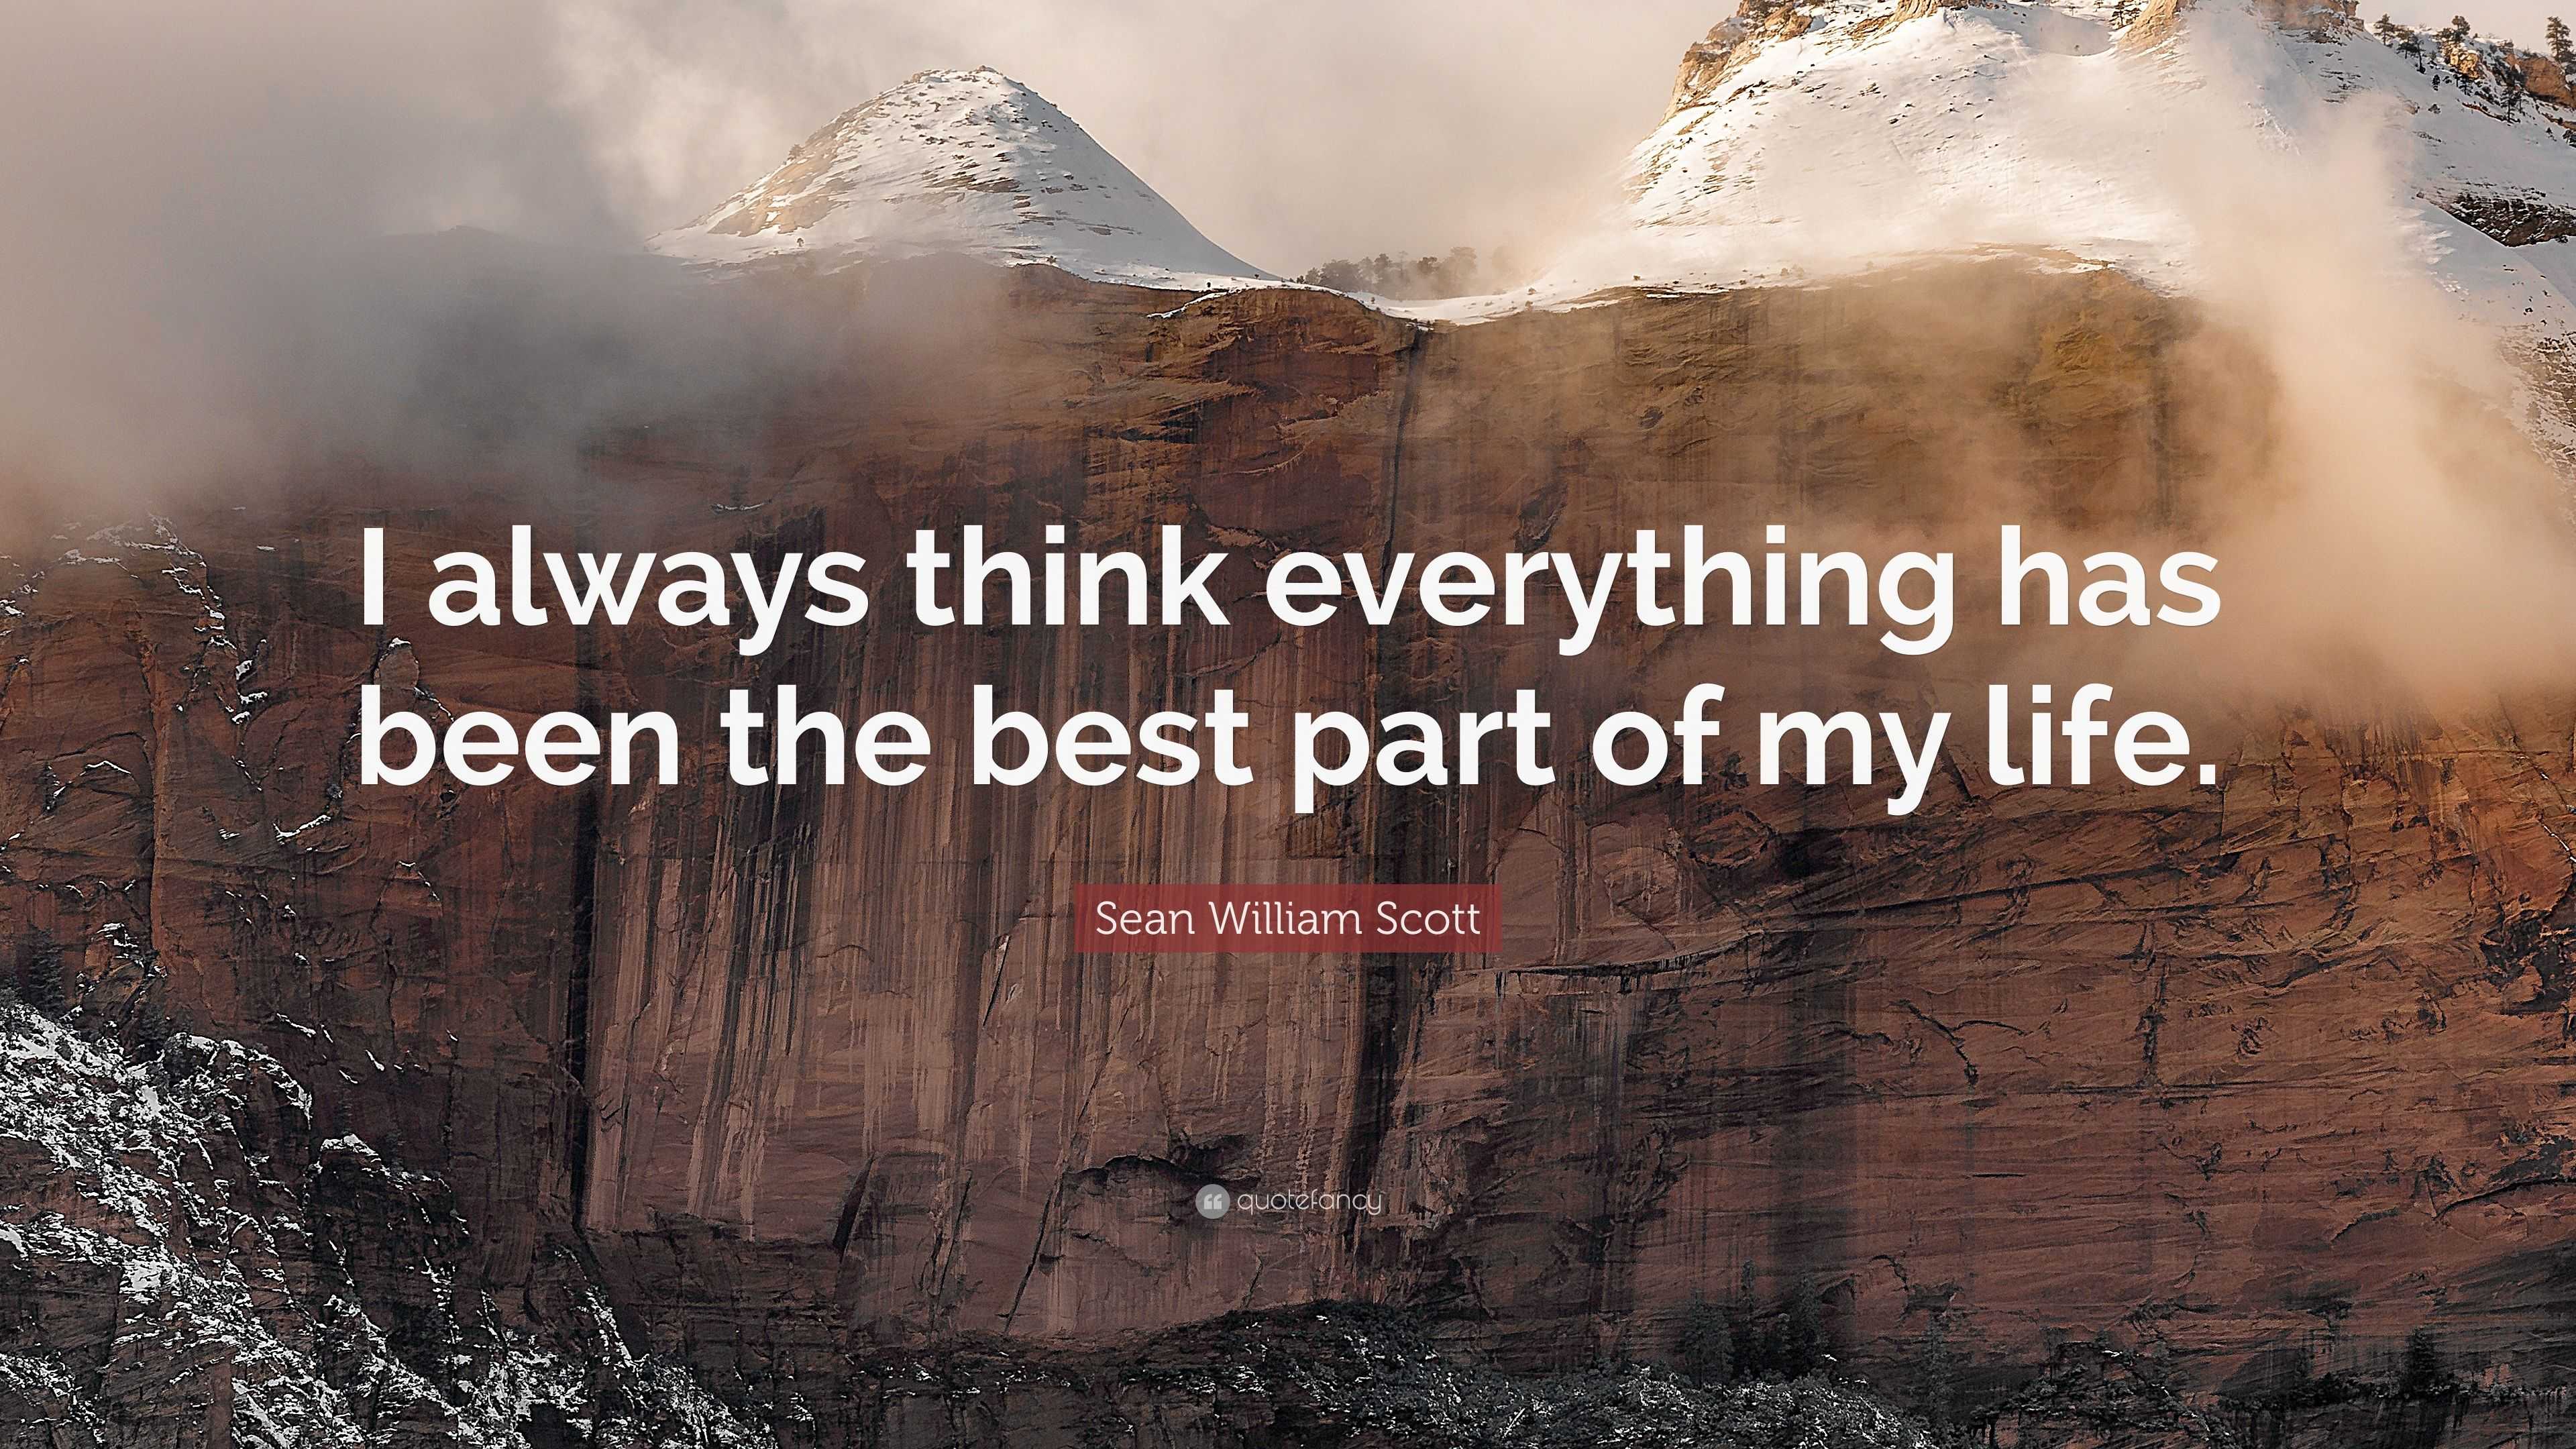 Sean William Scott Quote “I always think everything has been the best part of